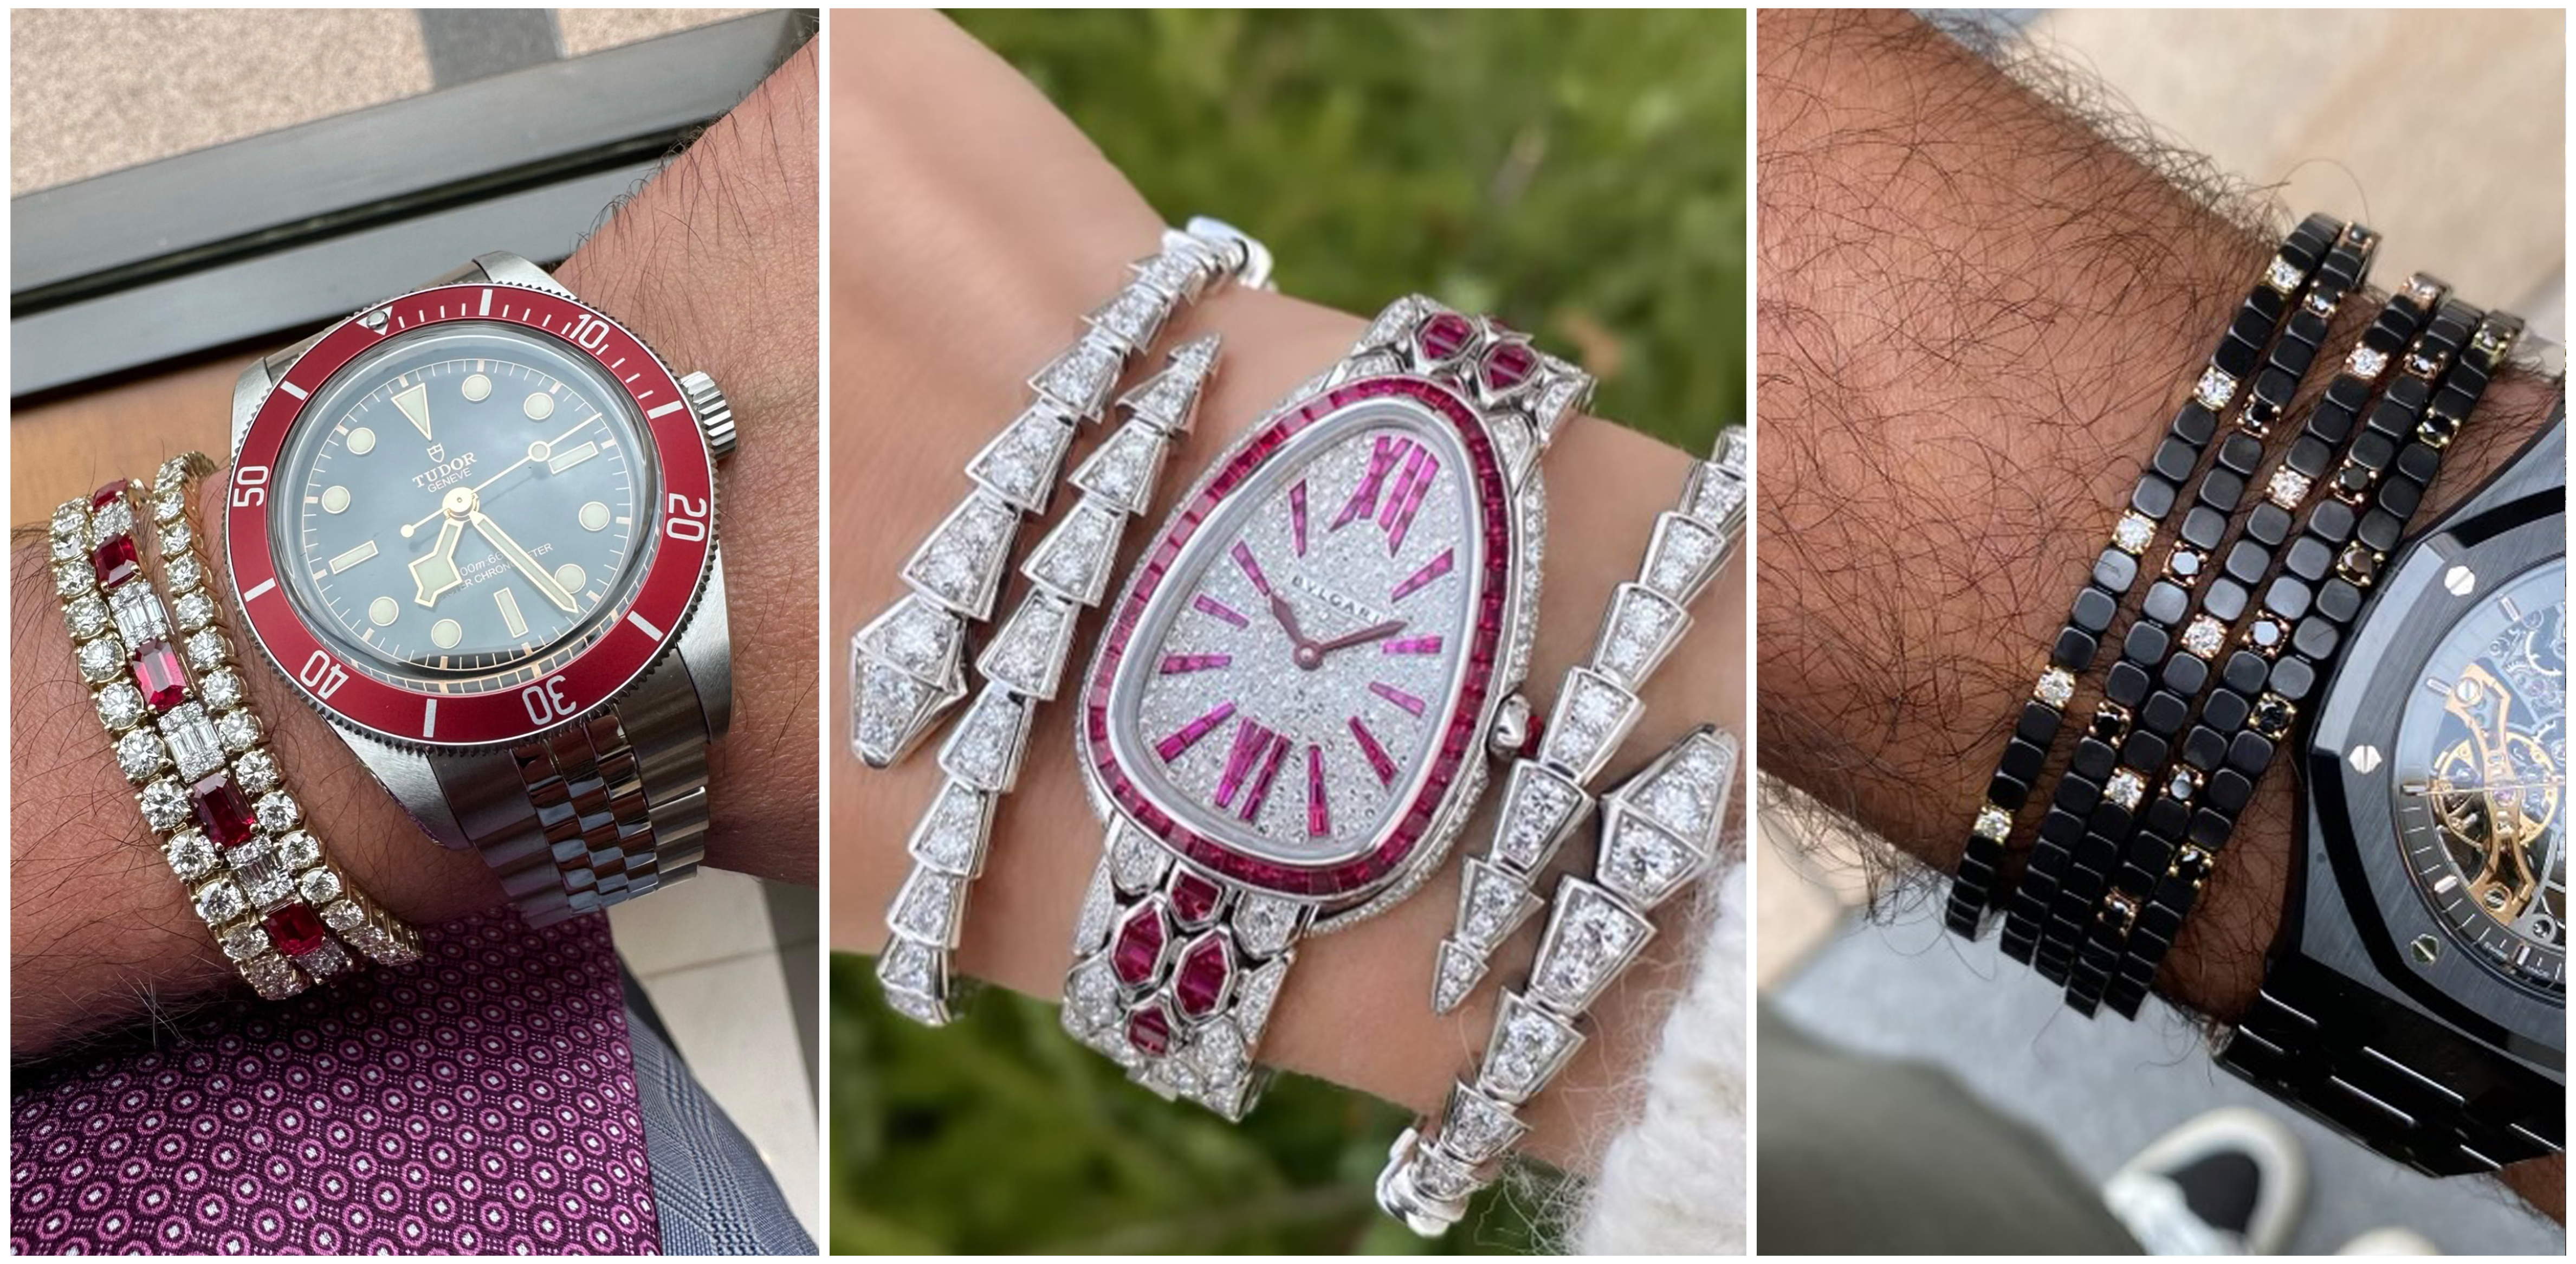 For the ladies out there, what bracelet do you wear with your watch? | iMore